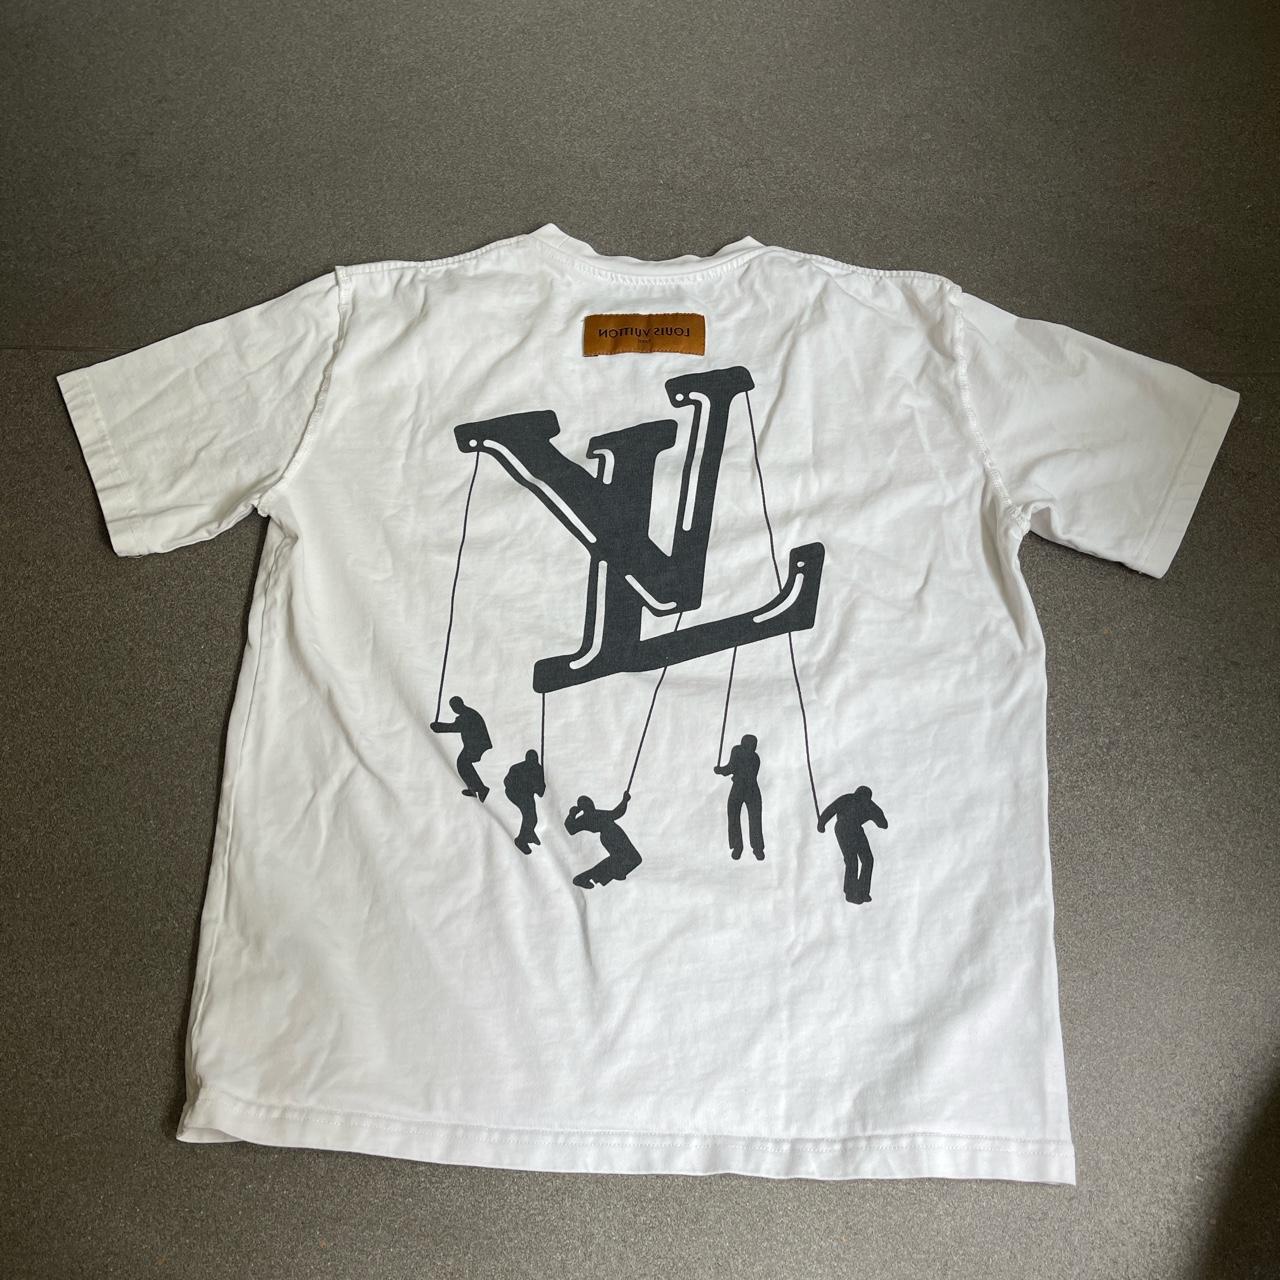 Louis Vuitton Shirt White with blue and black - Depop